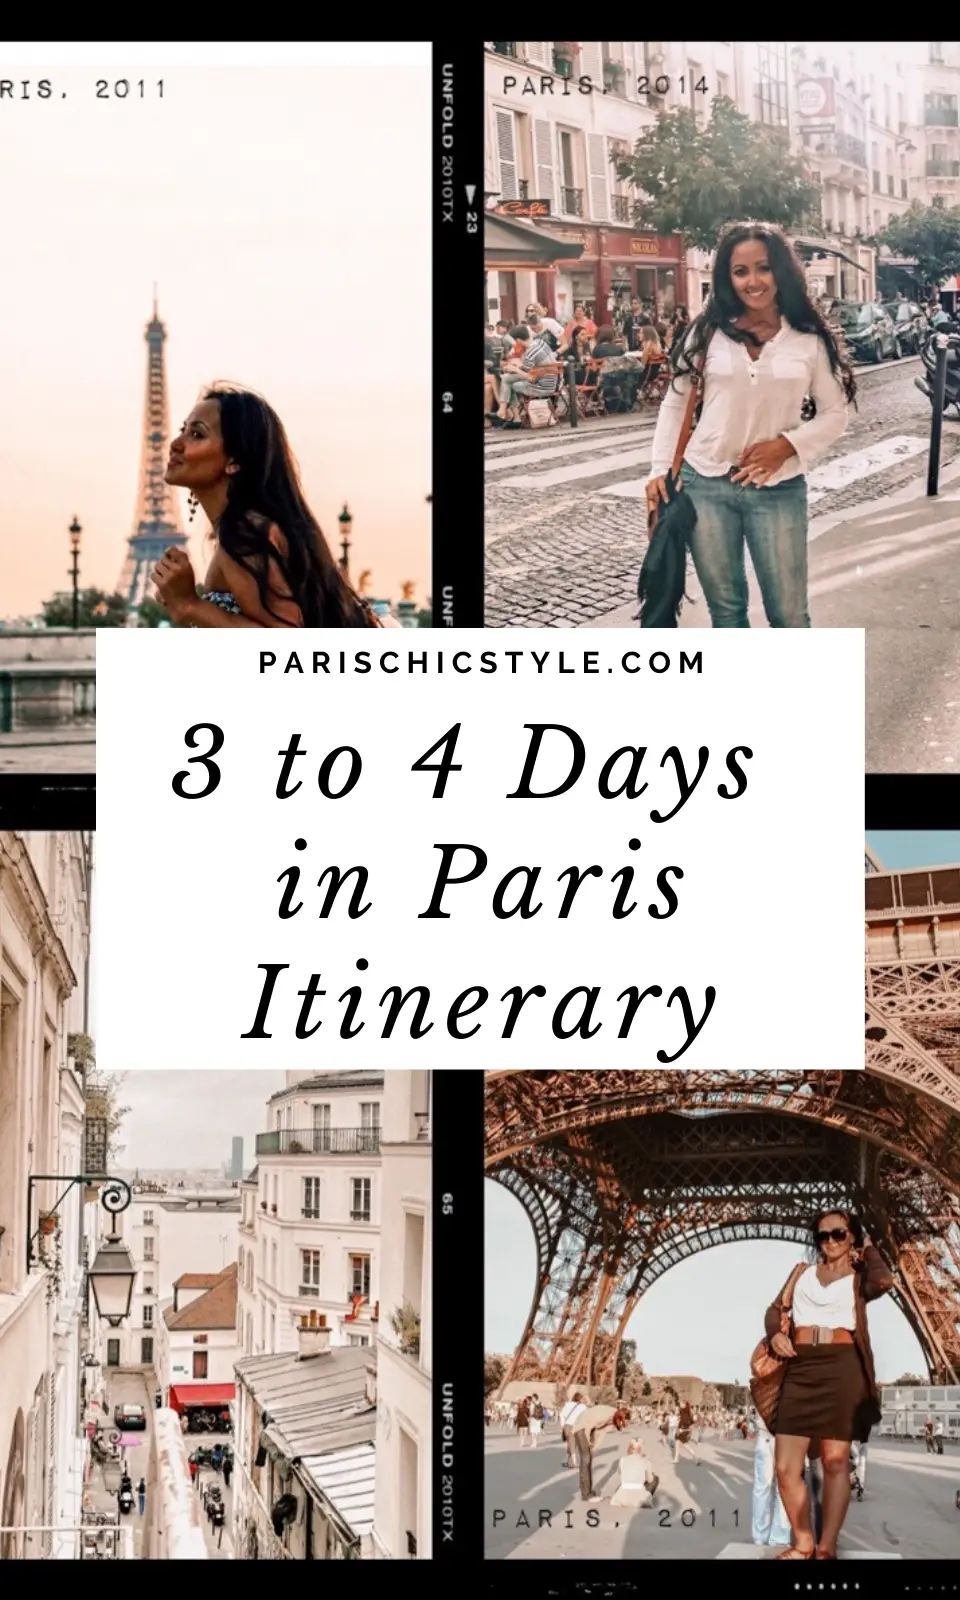 3 to 4 days in Paris itinerary travel guide best things to do in paris chic style